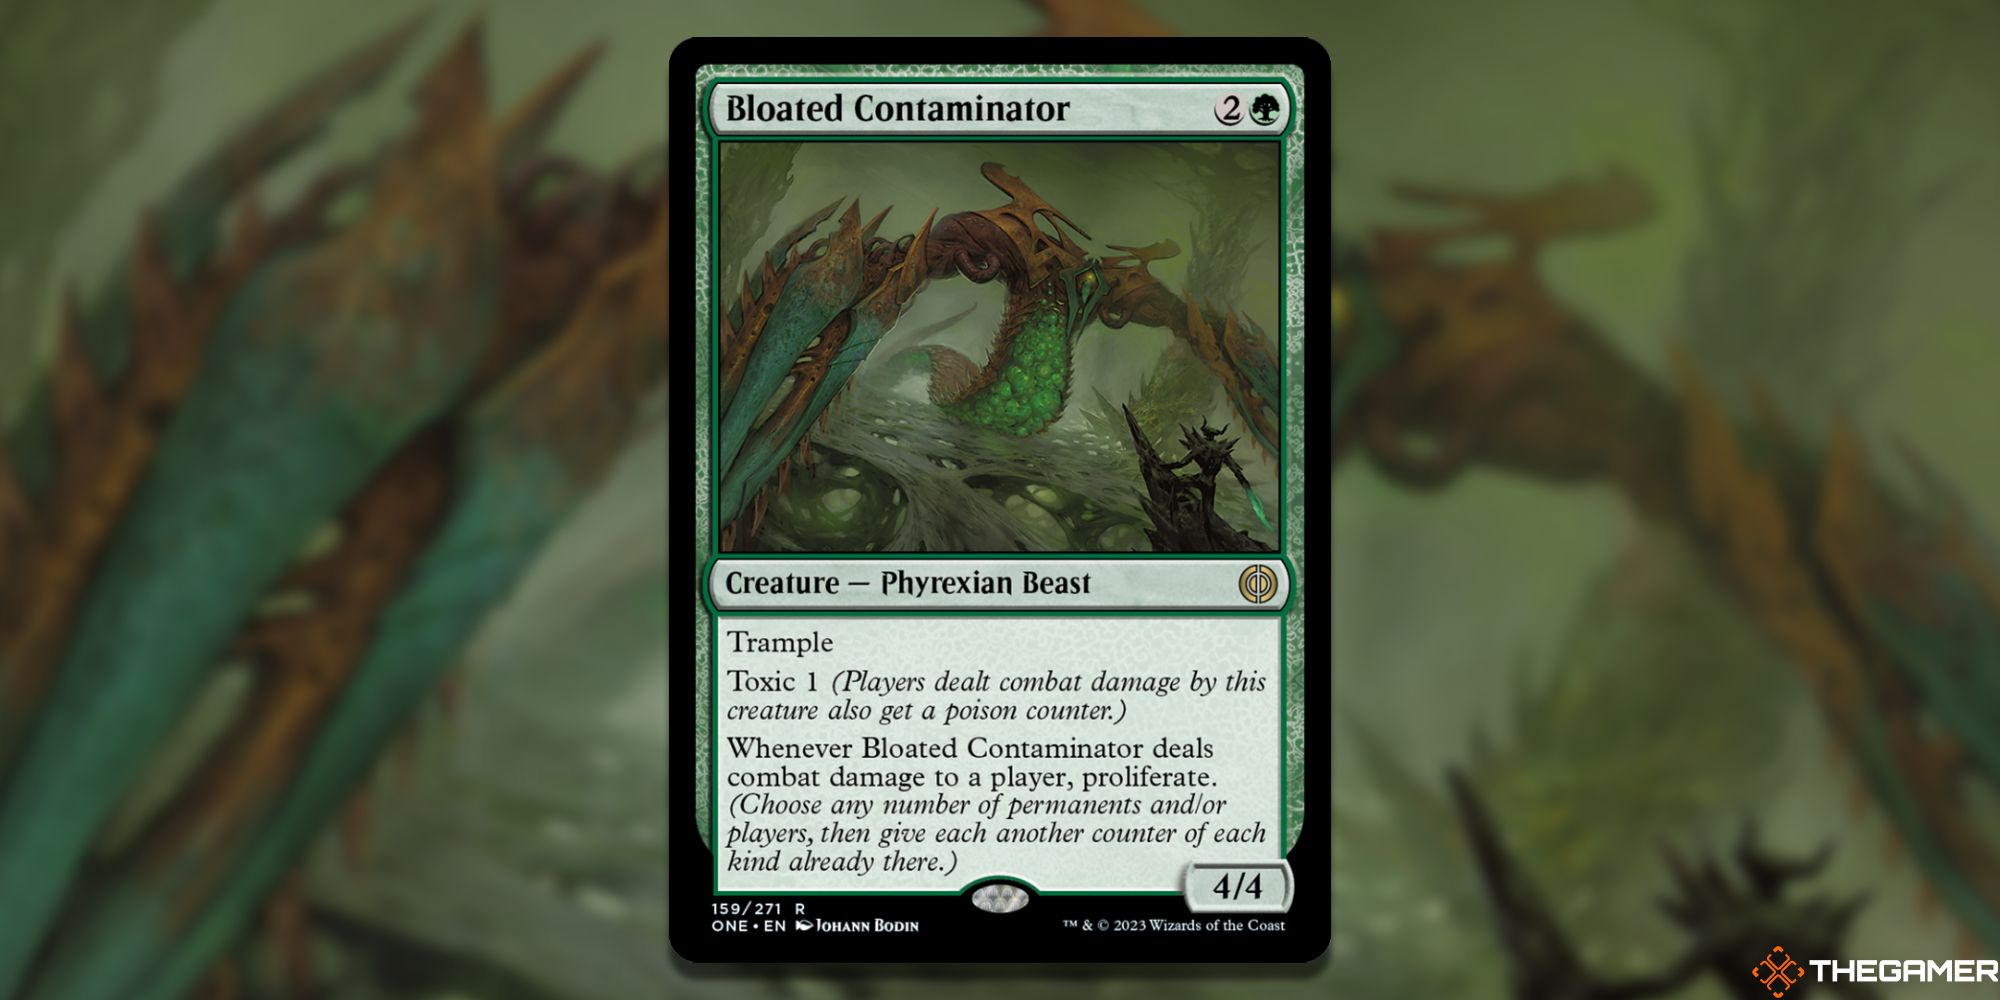 Image of the Bloated Contaminator card in Magic: The Gathering, with art by Johann Bodin